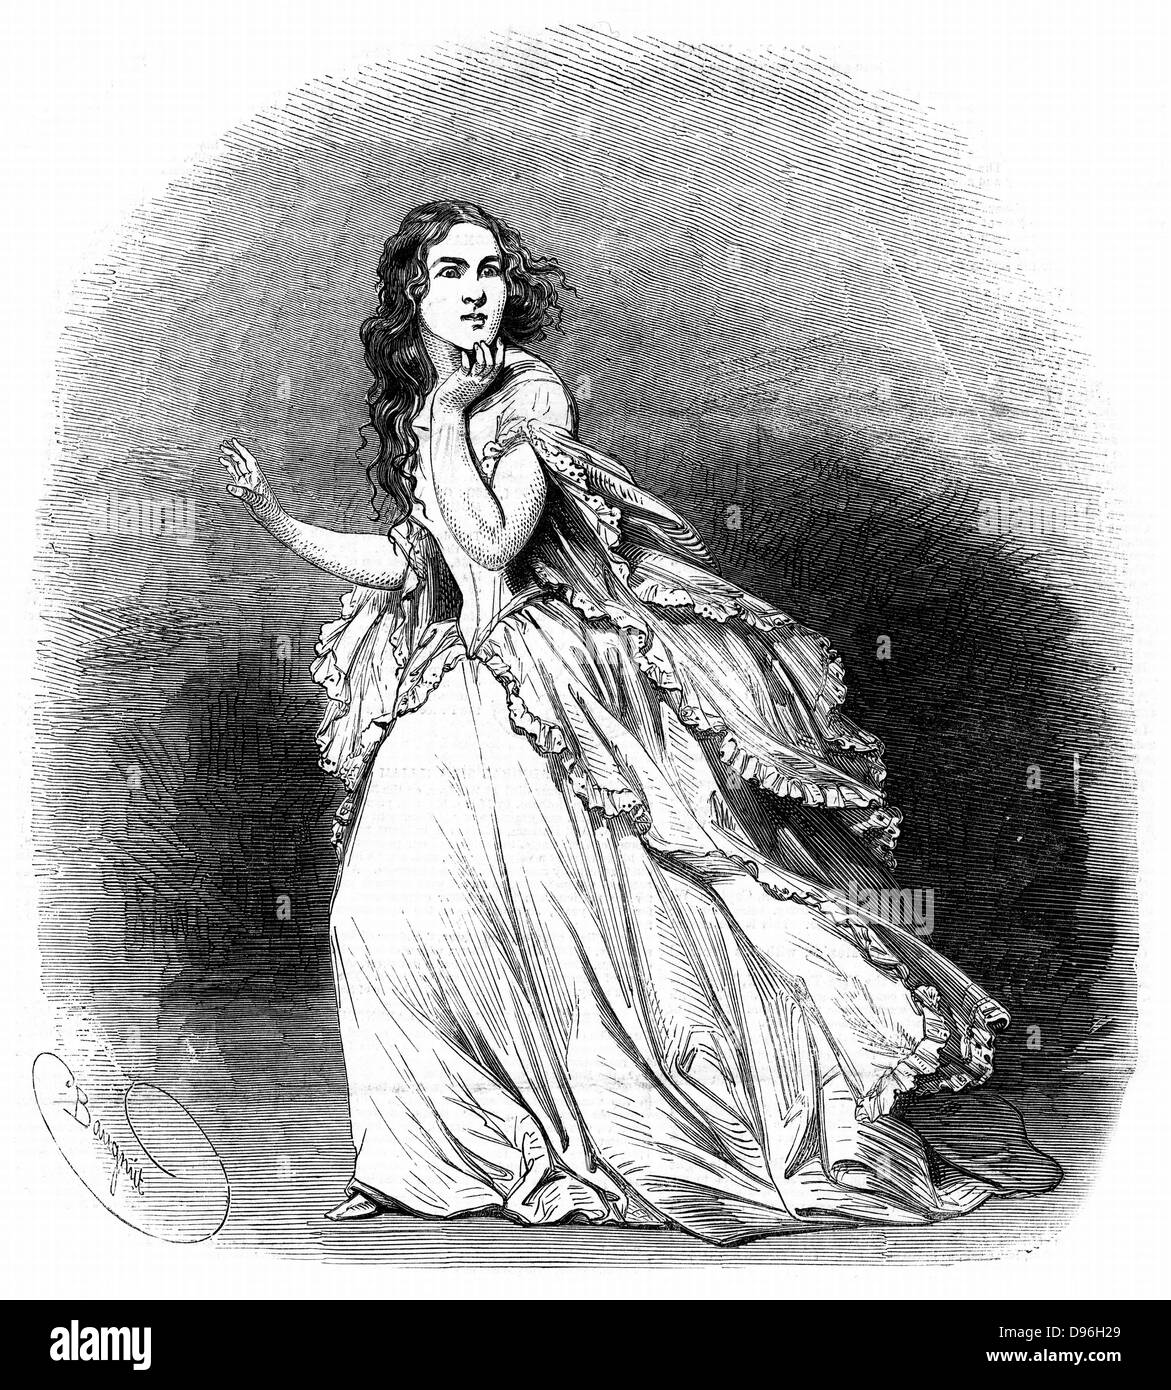 Jenny Lind (1820-87) soprano known as the 'Swedish Nightingale', 1848. Lind in the title role of Donizetti's opera 'Lucia di Lammermoor' based on the novel 'The Bride of Lammermoor' by Walter Scott. This is the final scene where Lucia goes mad: Her Majesty's Theatre, London, 1848. The premier was at Naples in 1835, and the first London performance was in 1838. From 'The Illustrated London News'. (London, 1848).   Wood engraving. Stock Photo